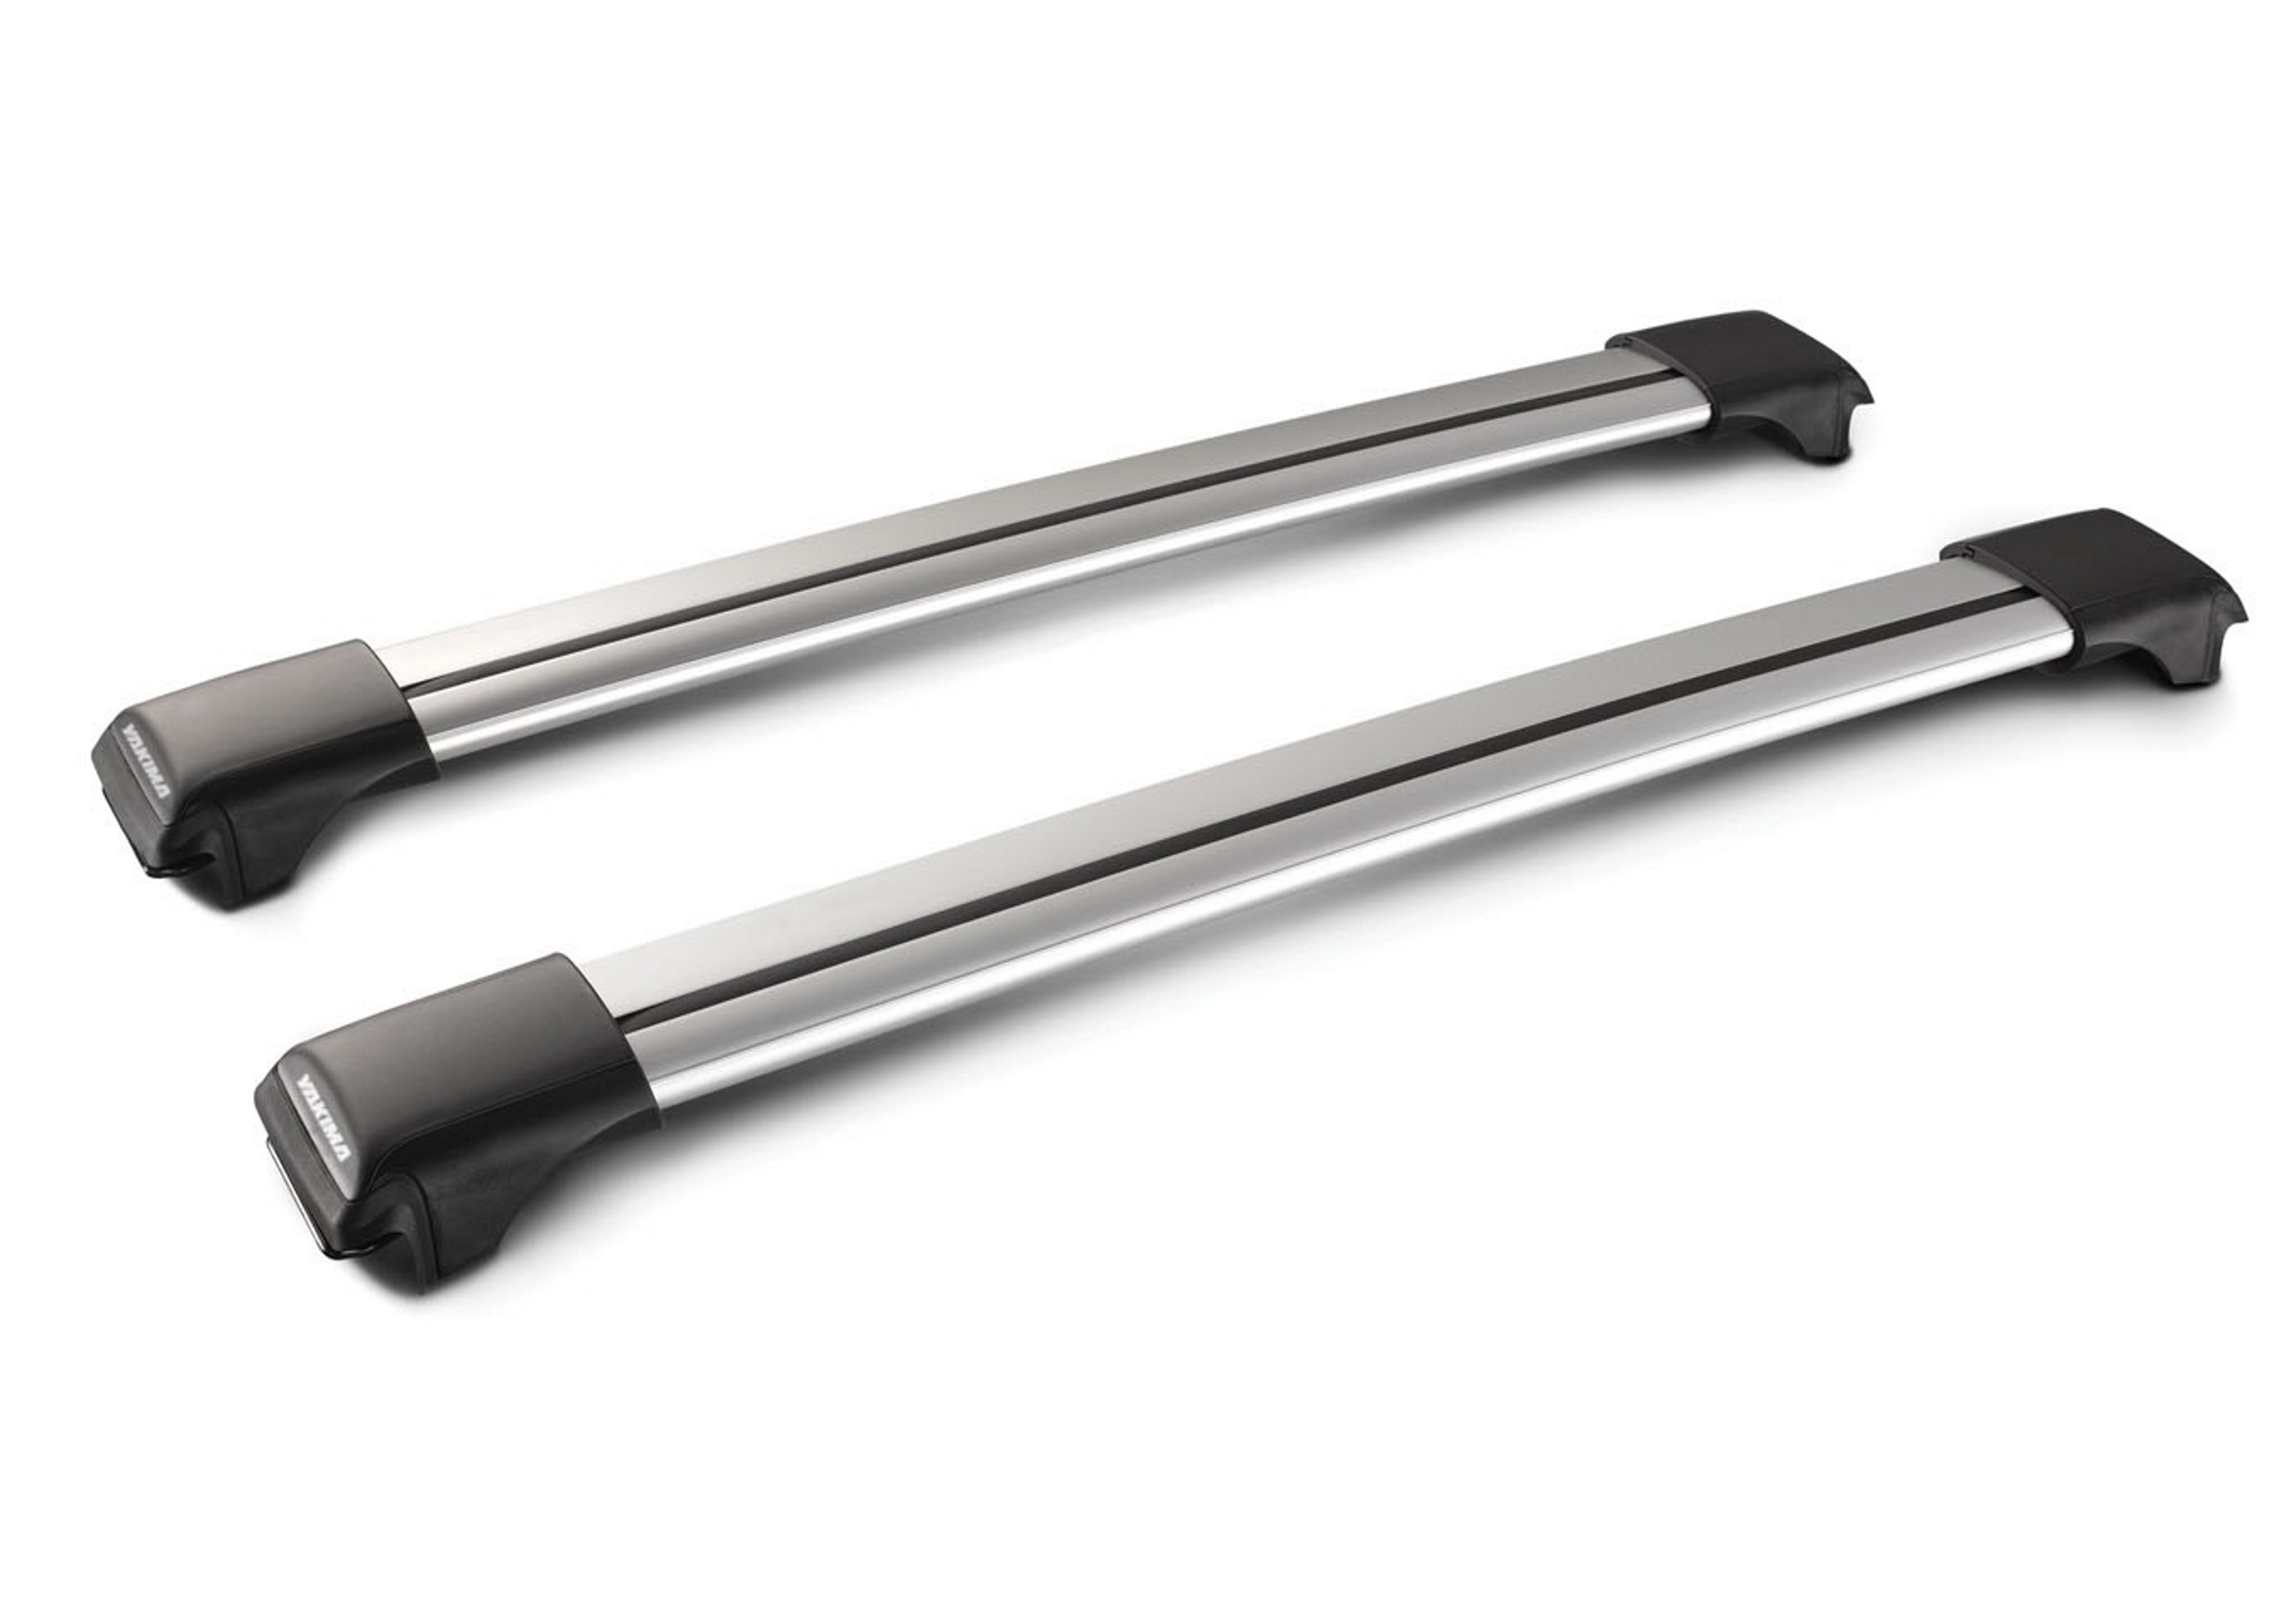 Chevrolet Cruze estate (2012 to 2016):Yakima roof bars package - S53 Aero-X silver bars